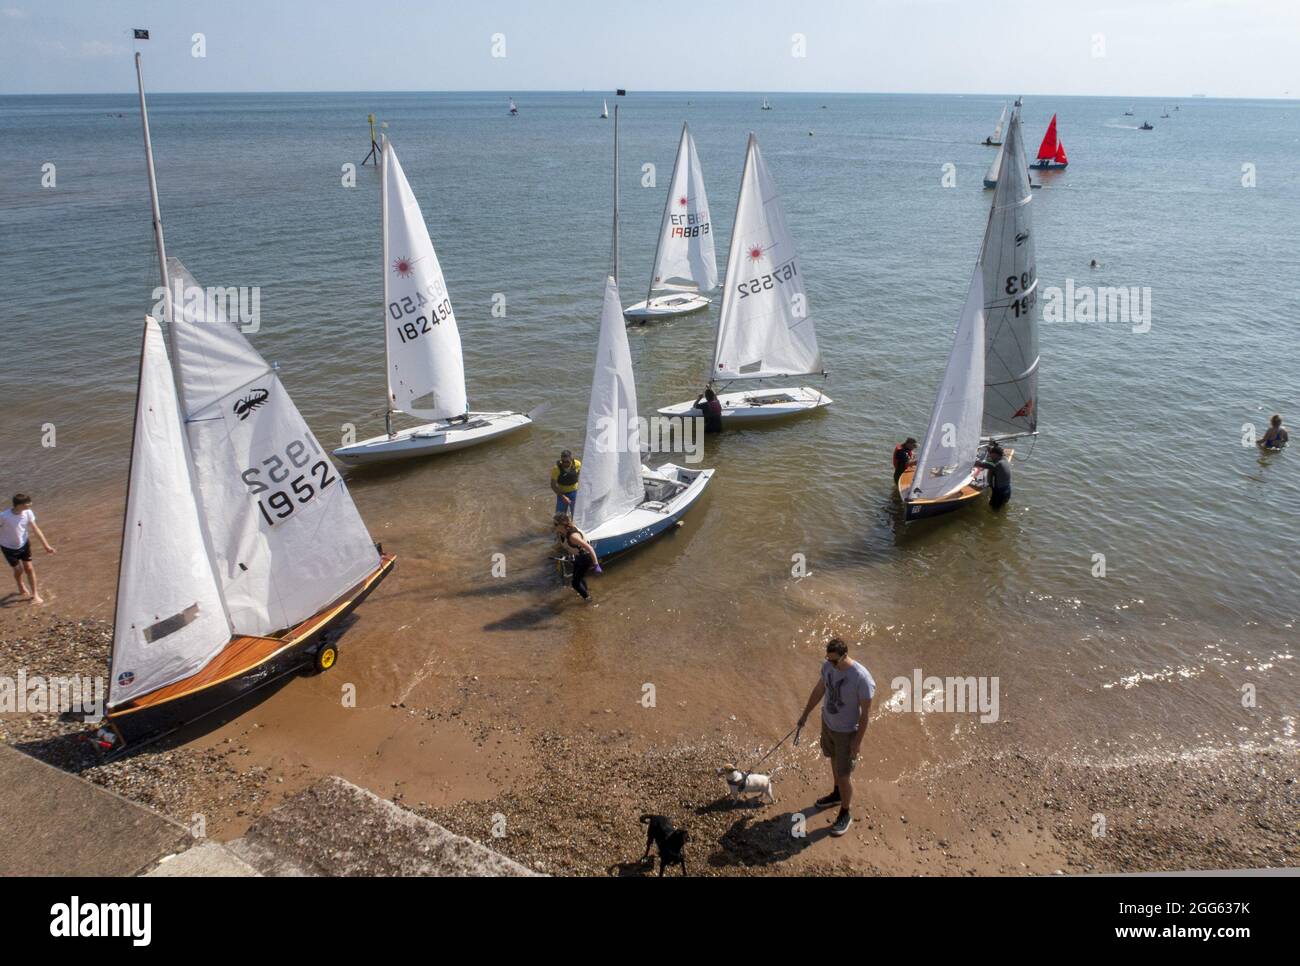 Sidmouth, Devon, UK. 29th August 2021. A sailing regatta was the highlight of Bank Holiday Sunday at Sidmouth, Devon. Glorious weather is expected to continue into next week across the South West. Credit: Photo Central/Alamy Live News Stock Photo